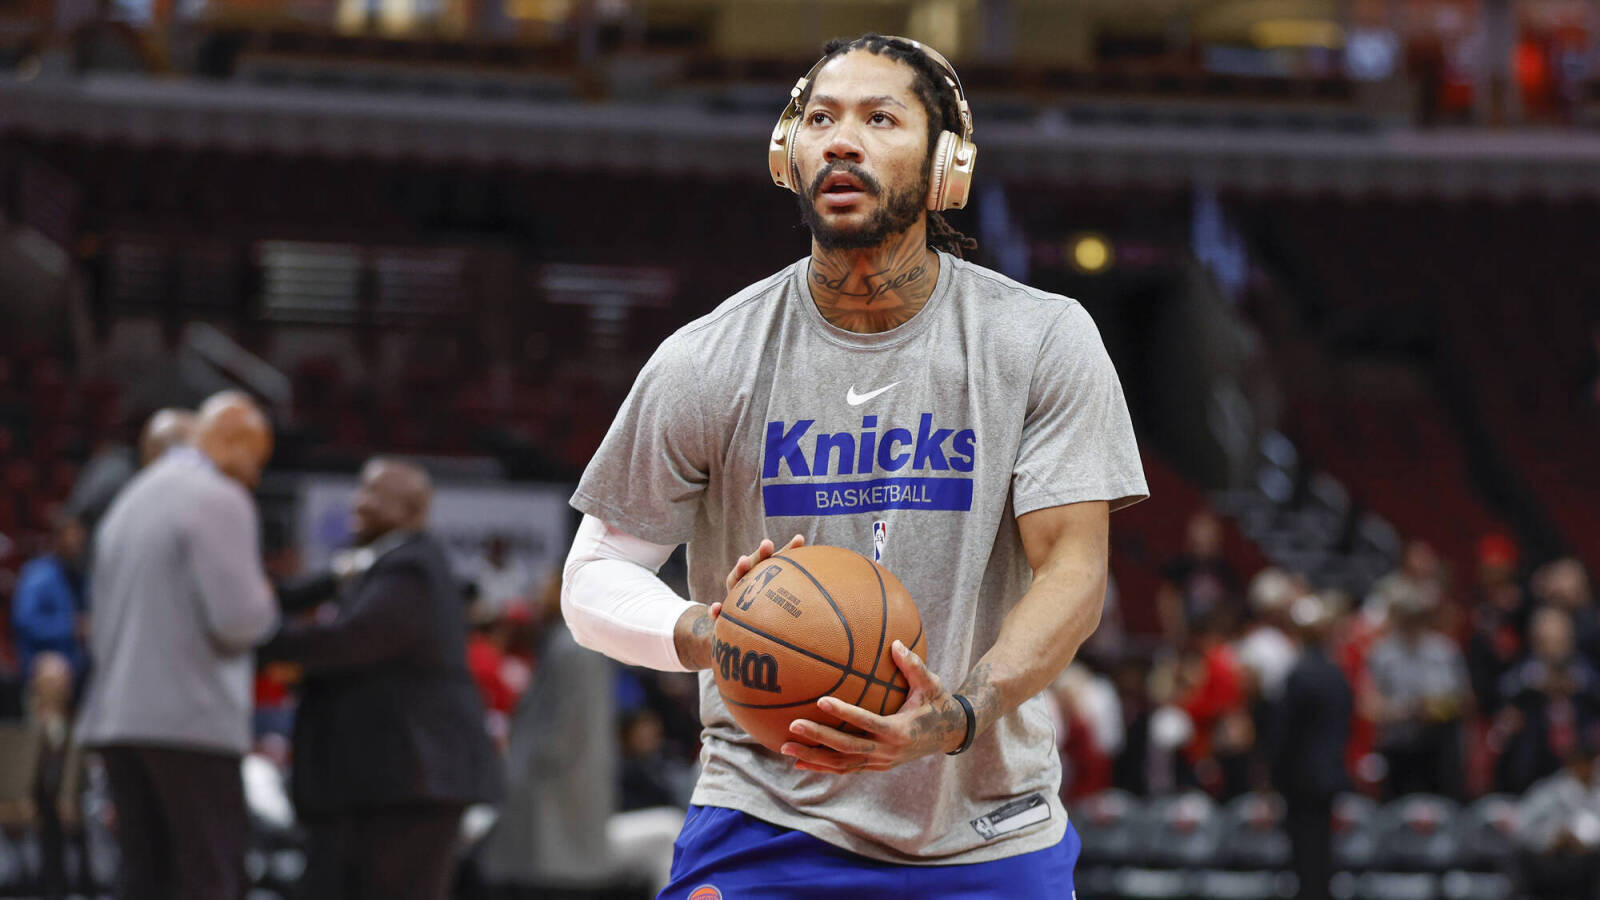 Derrick Rose Puts Knicks on Notice With 'Accountability' Message